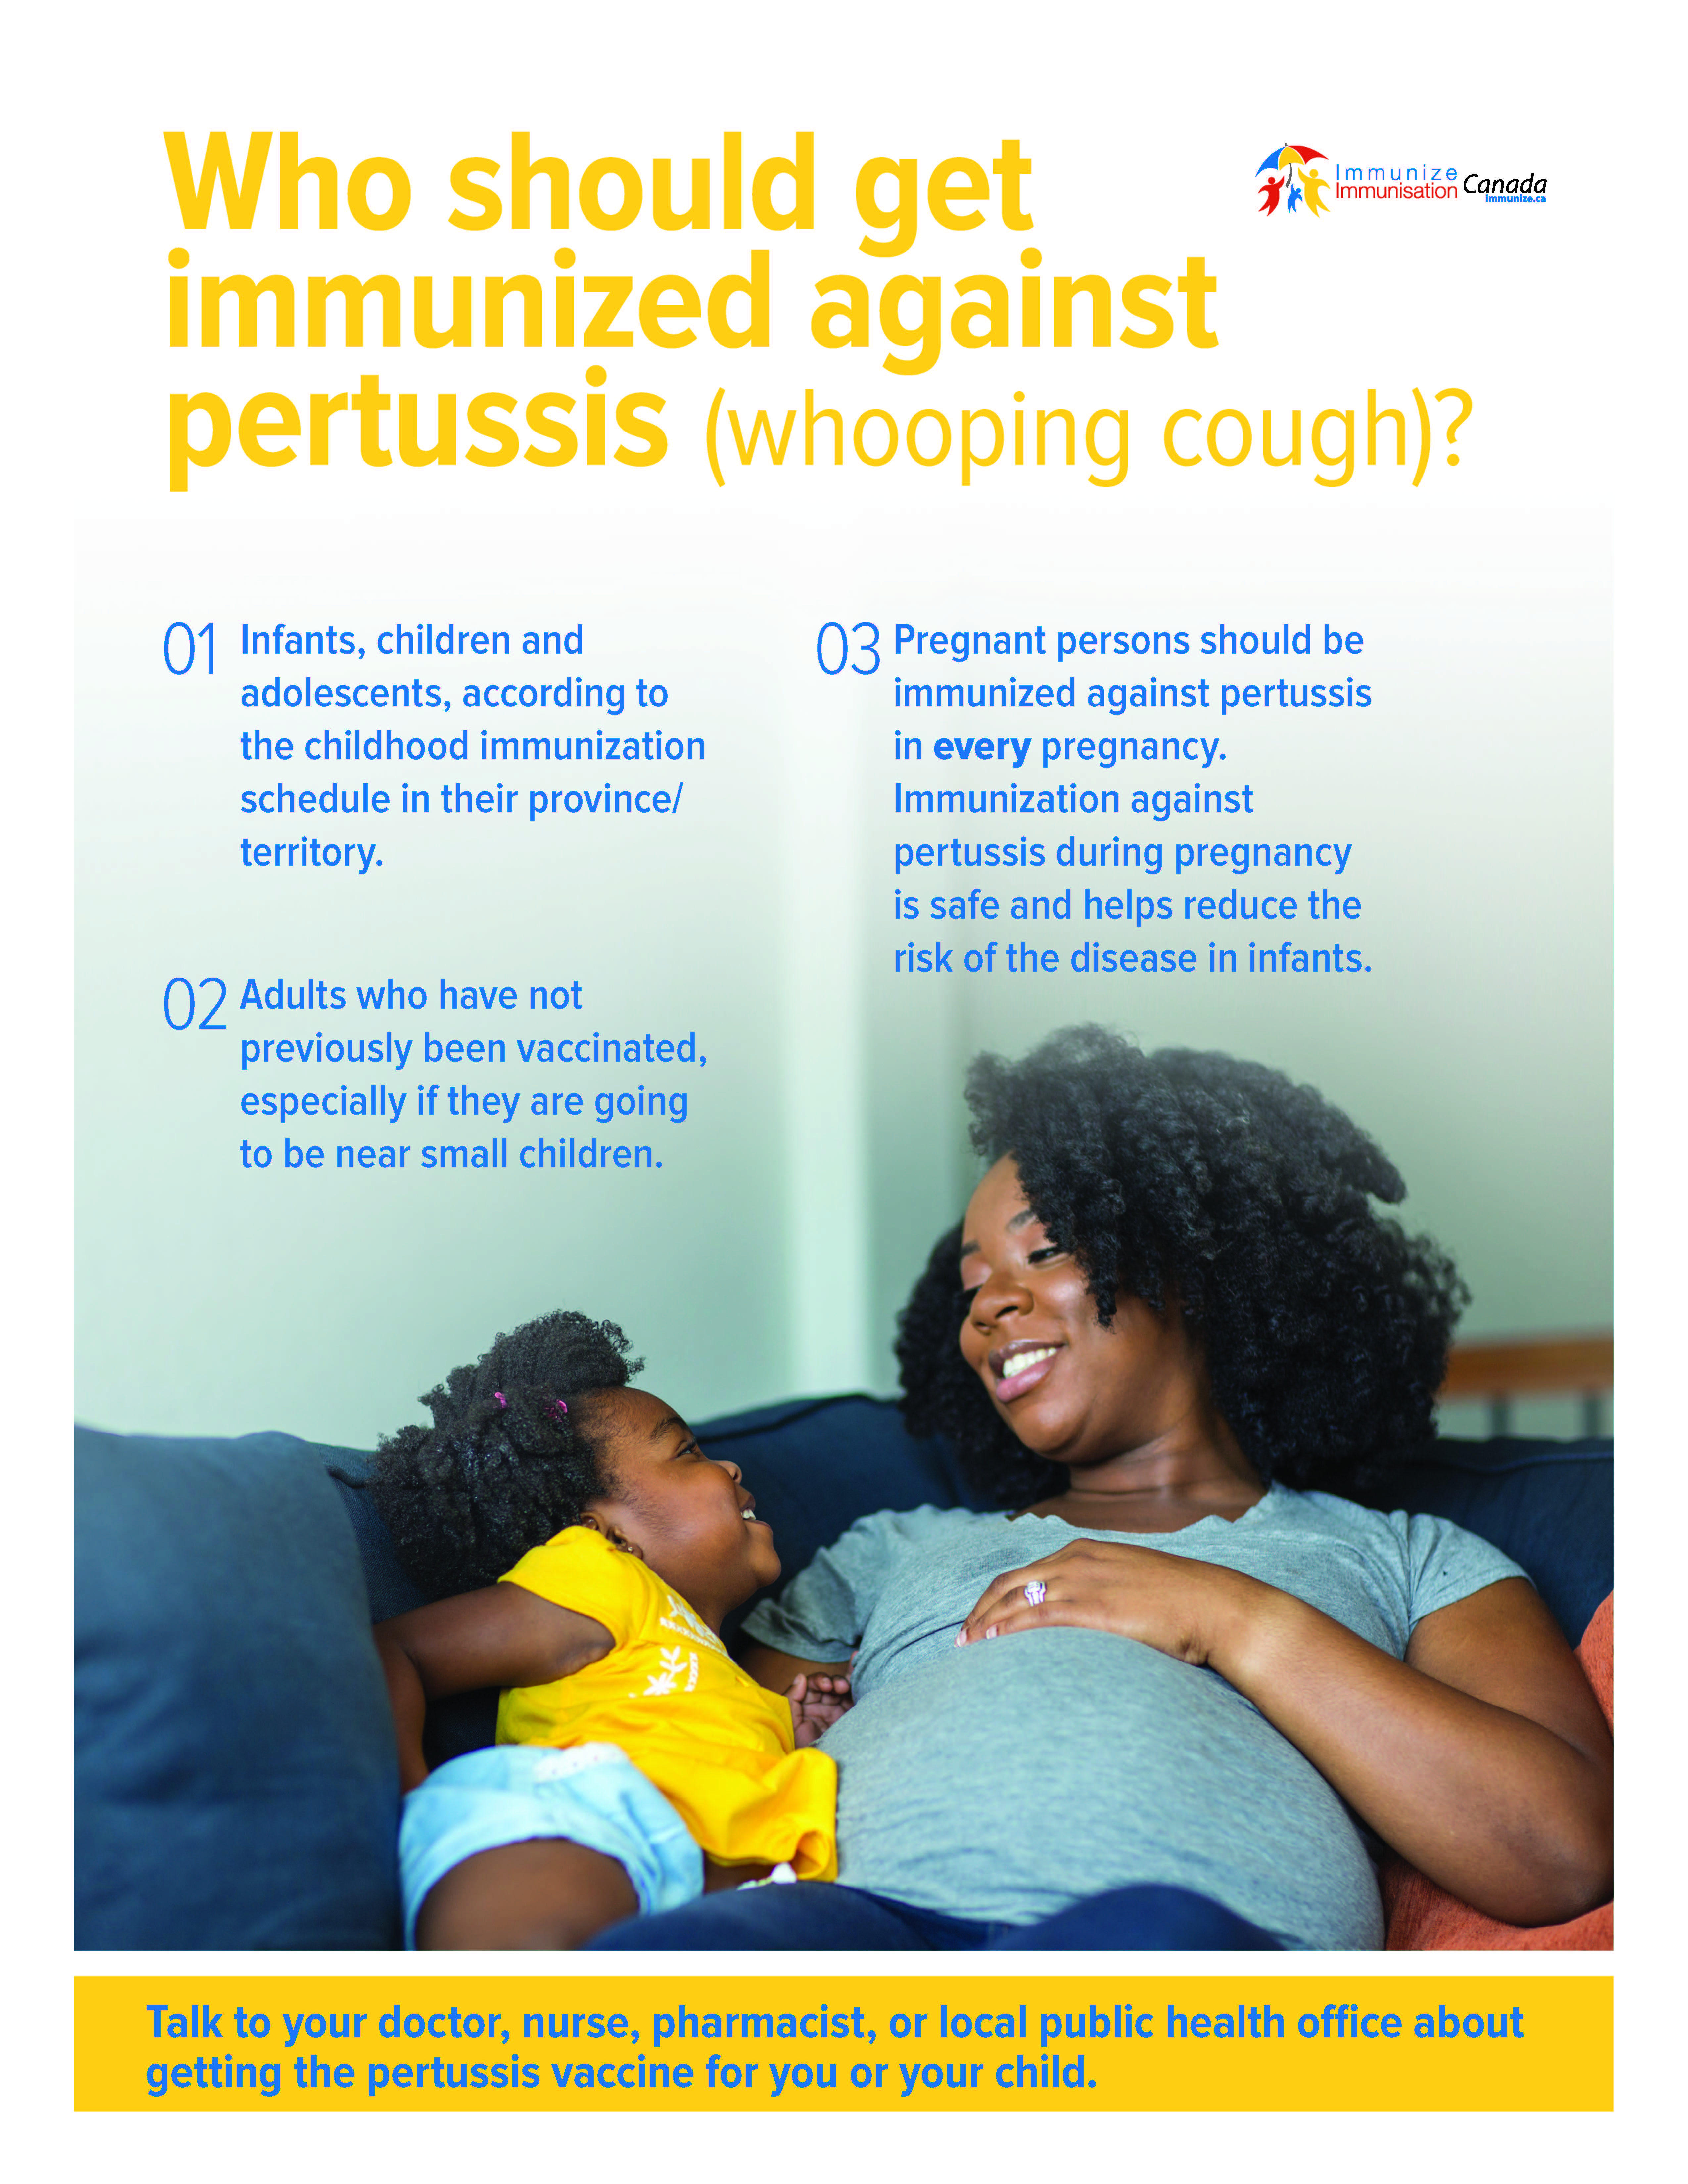 Who should get immunized against pertussis (whooping cough)?